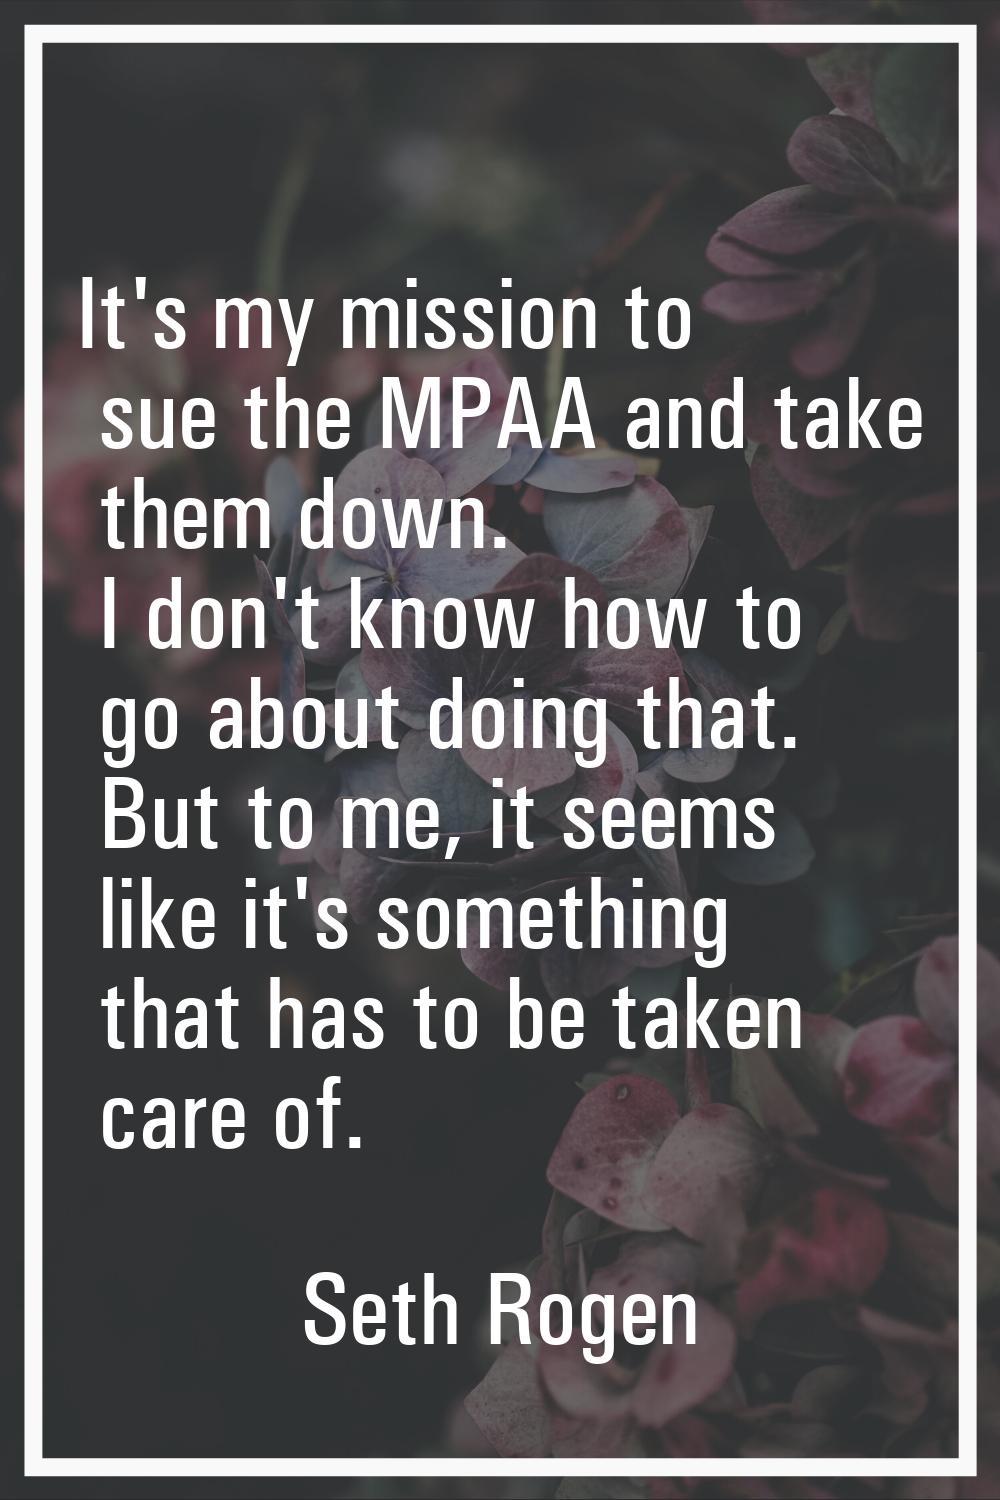 It's my mission to sue the MPAA and take them down. I don't know how to go about doing that. But to